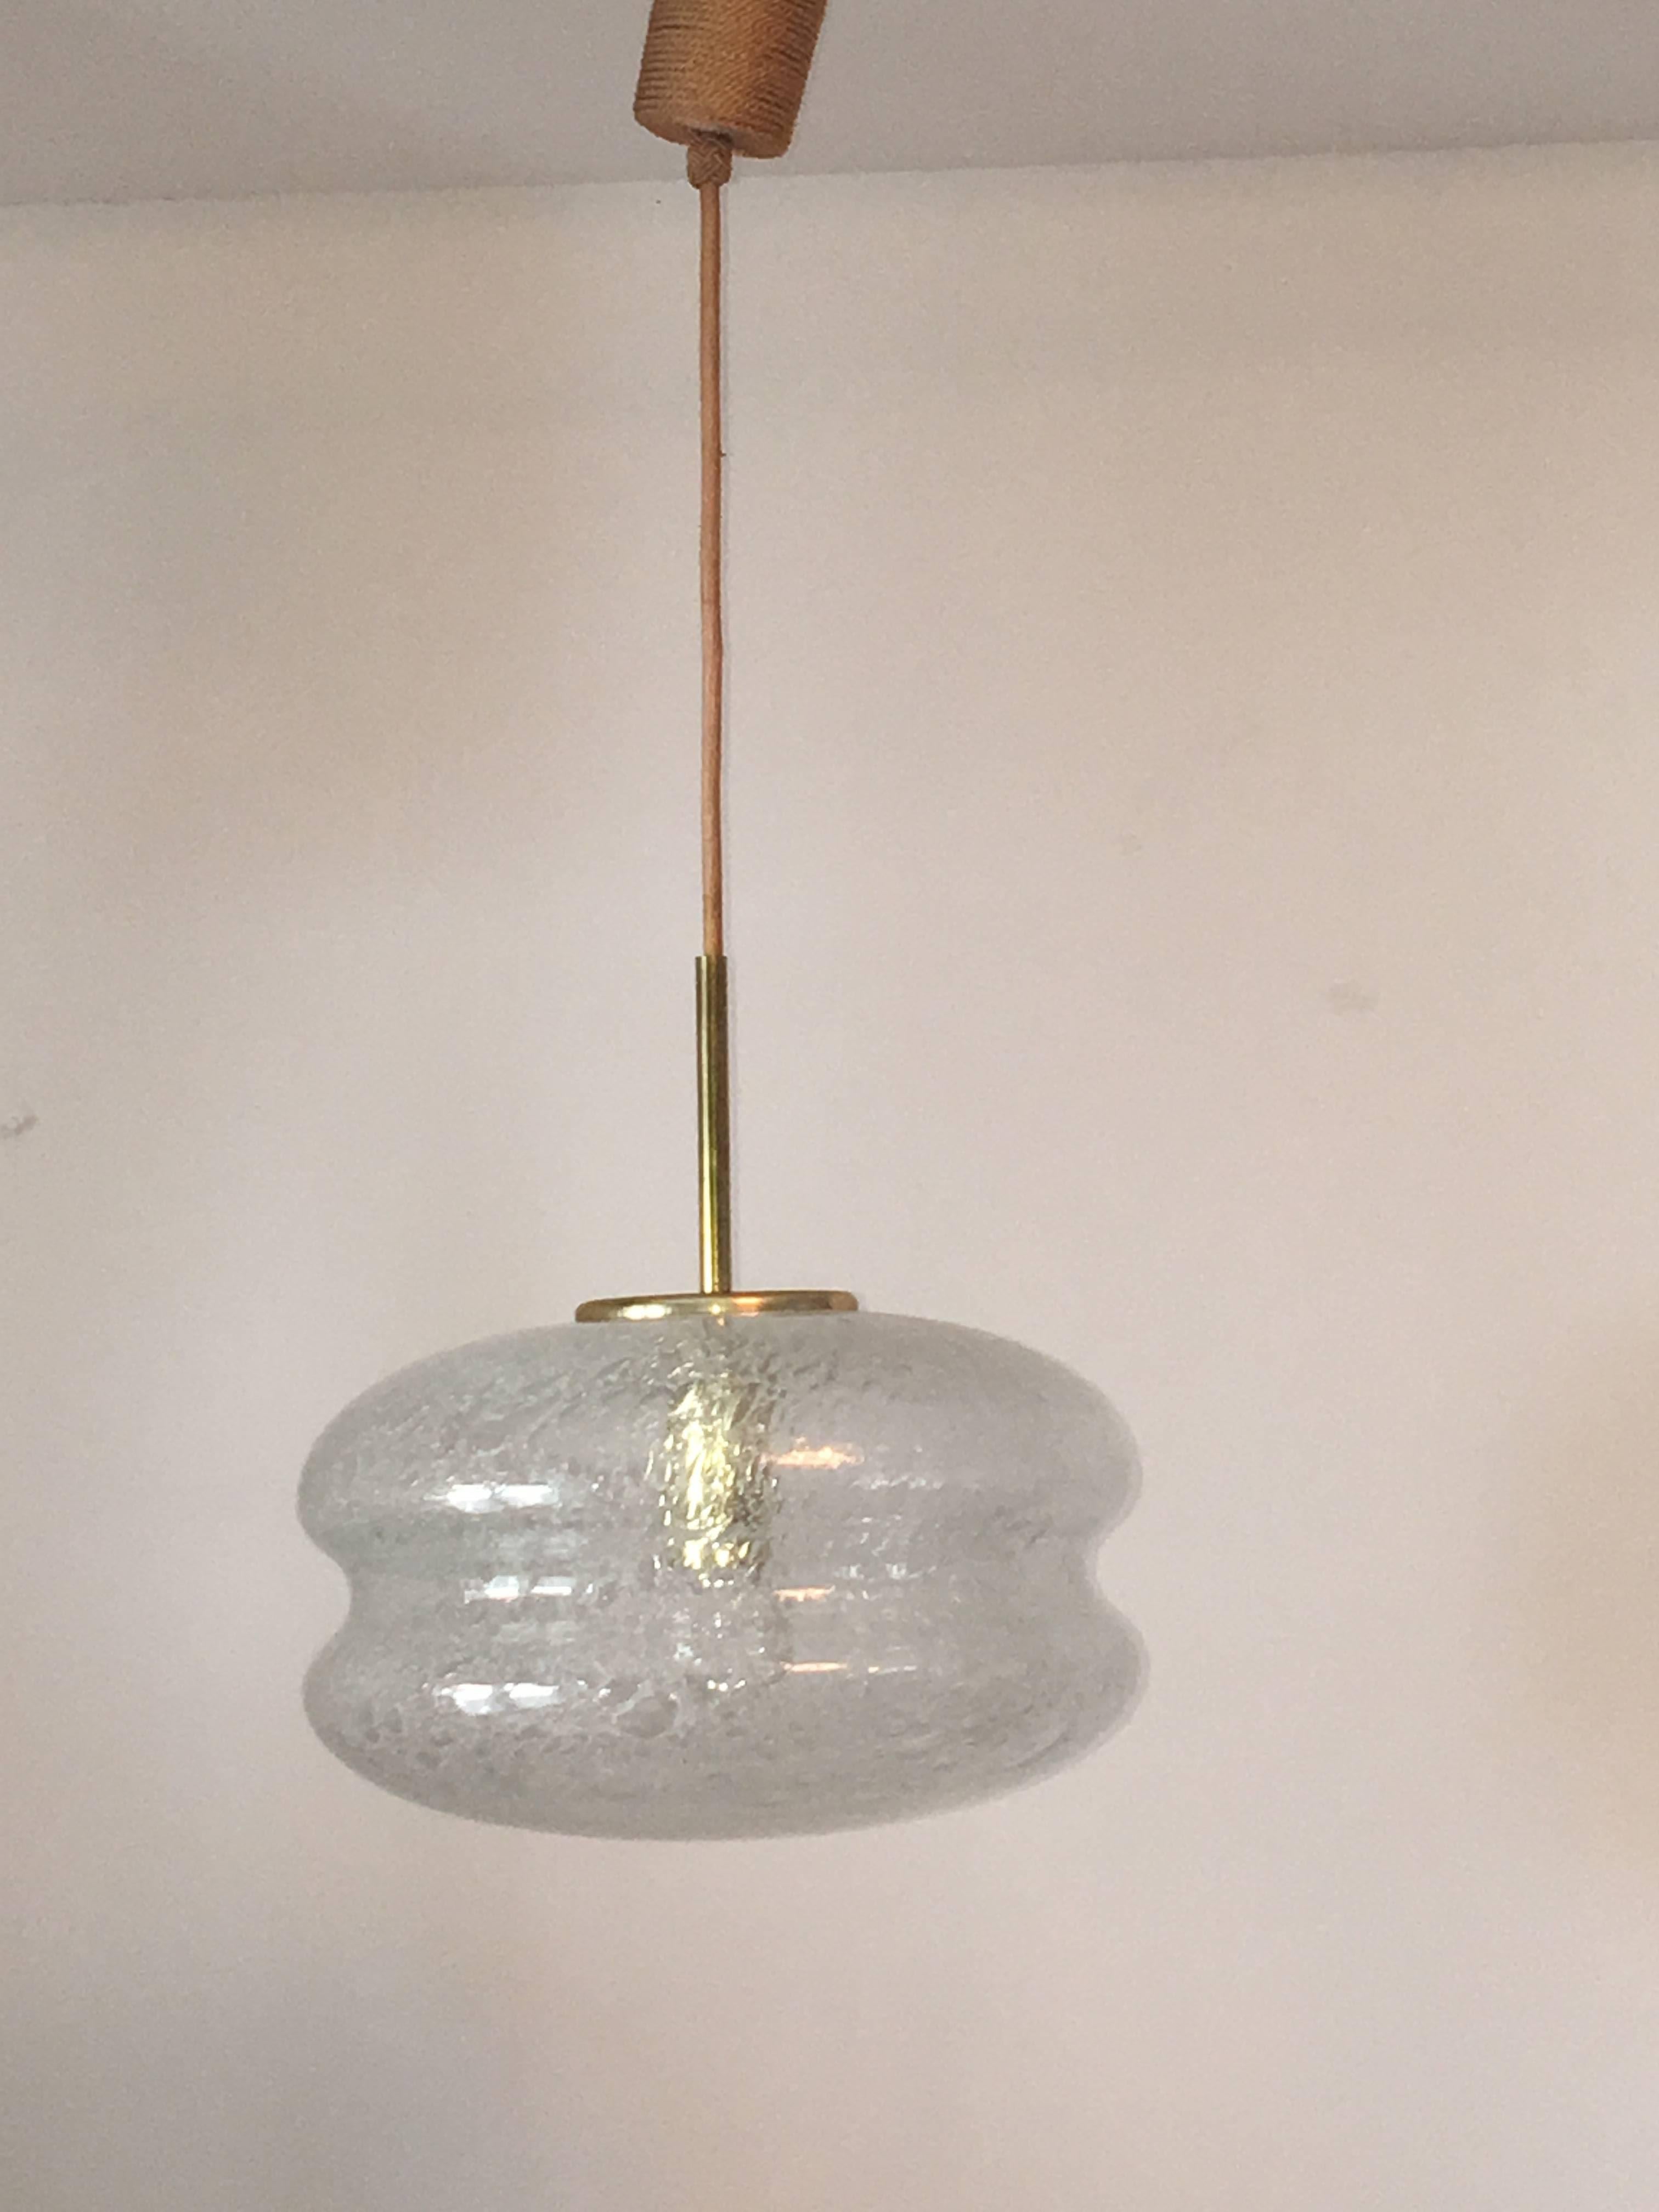 A air bubble glass pendant made in the 1960s by Doria, with cord coiling cable. The fixture requires one European E27 Edison bulbs, the bulb up to 150 watts.